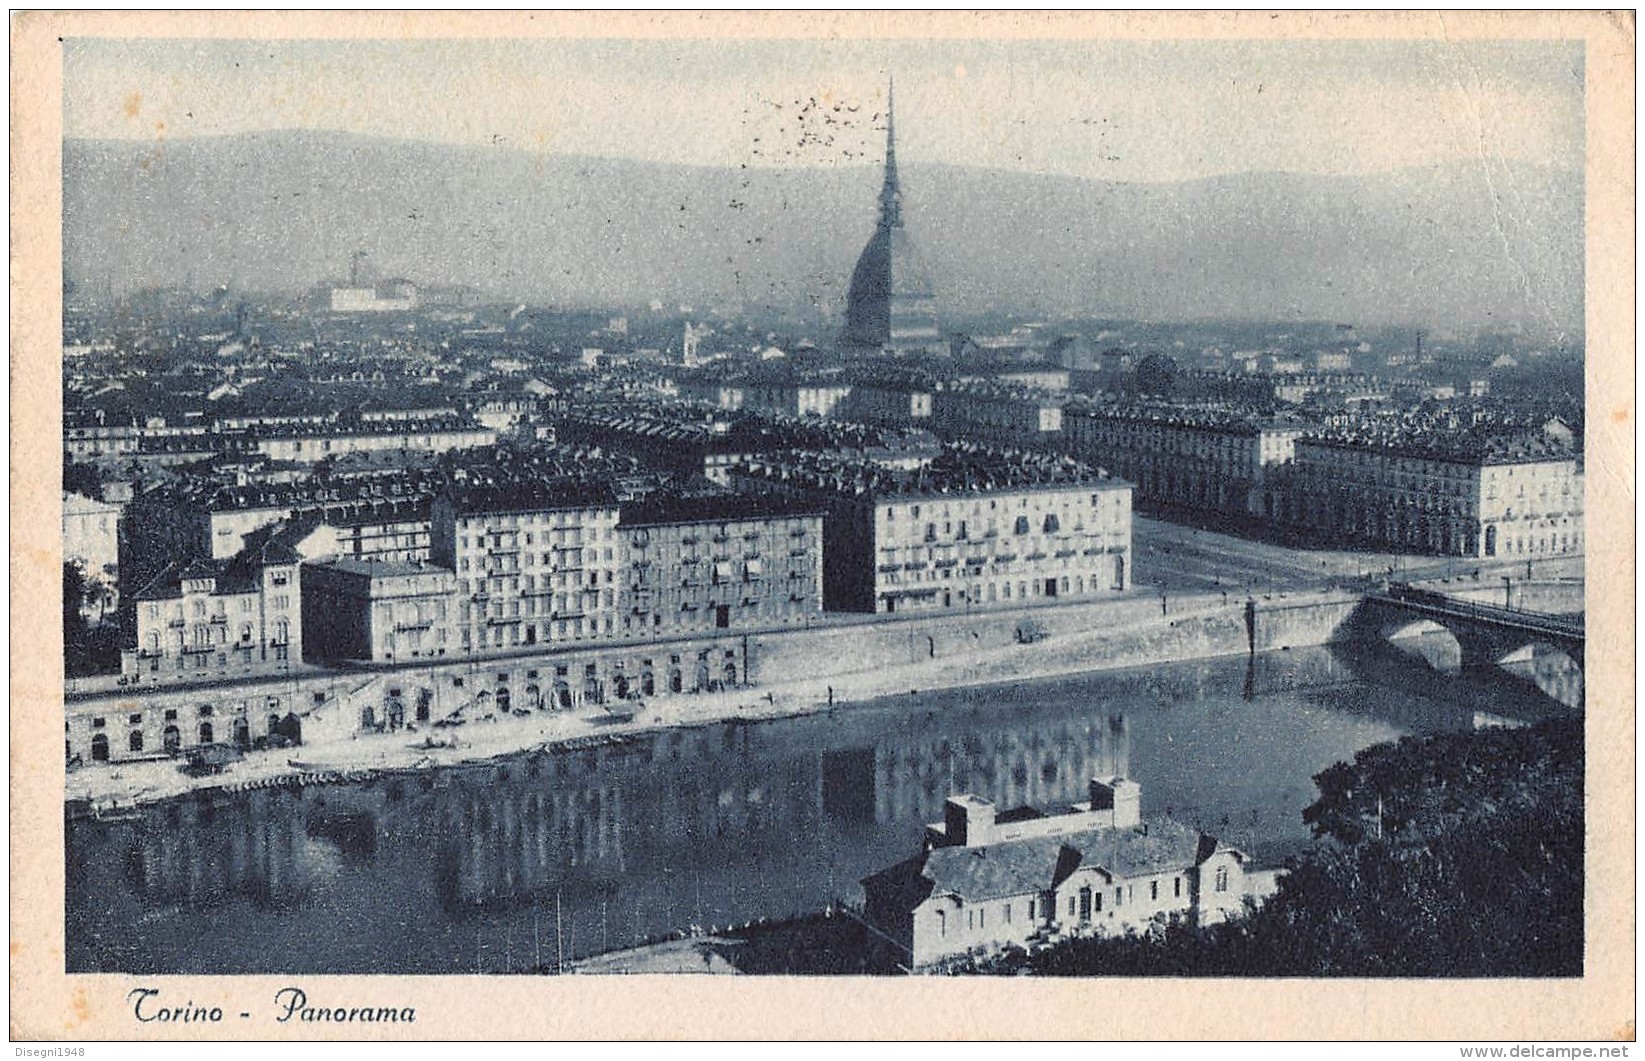 06406 "TORINO - PANORAMA" CART. ILL. ORIG. SPED. 1930 - Multi-vues, Vues Panoramiques